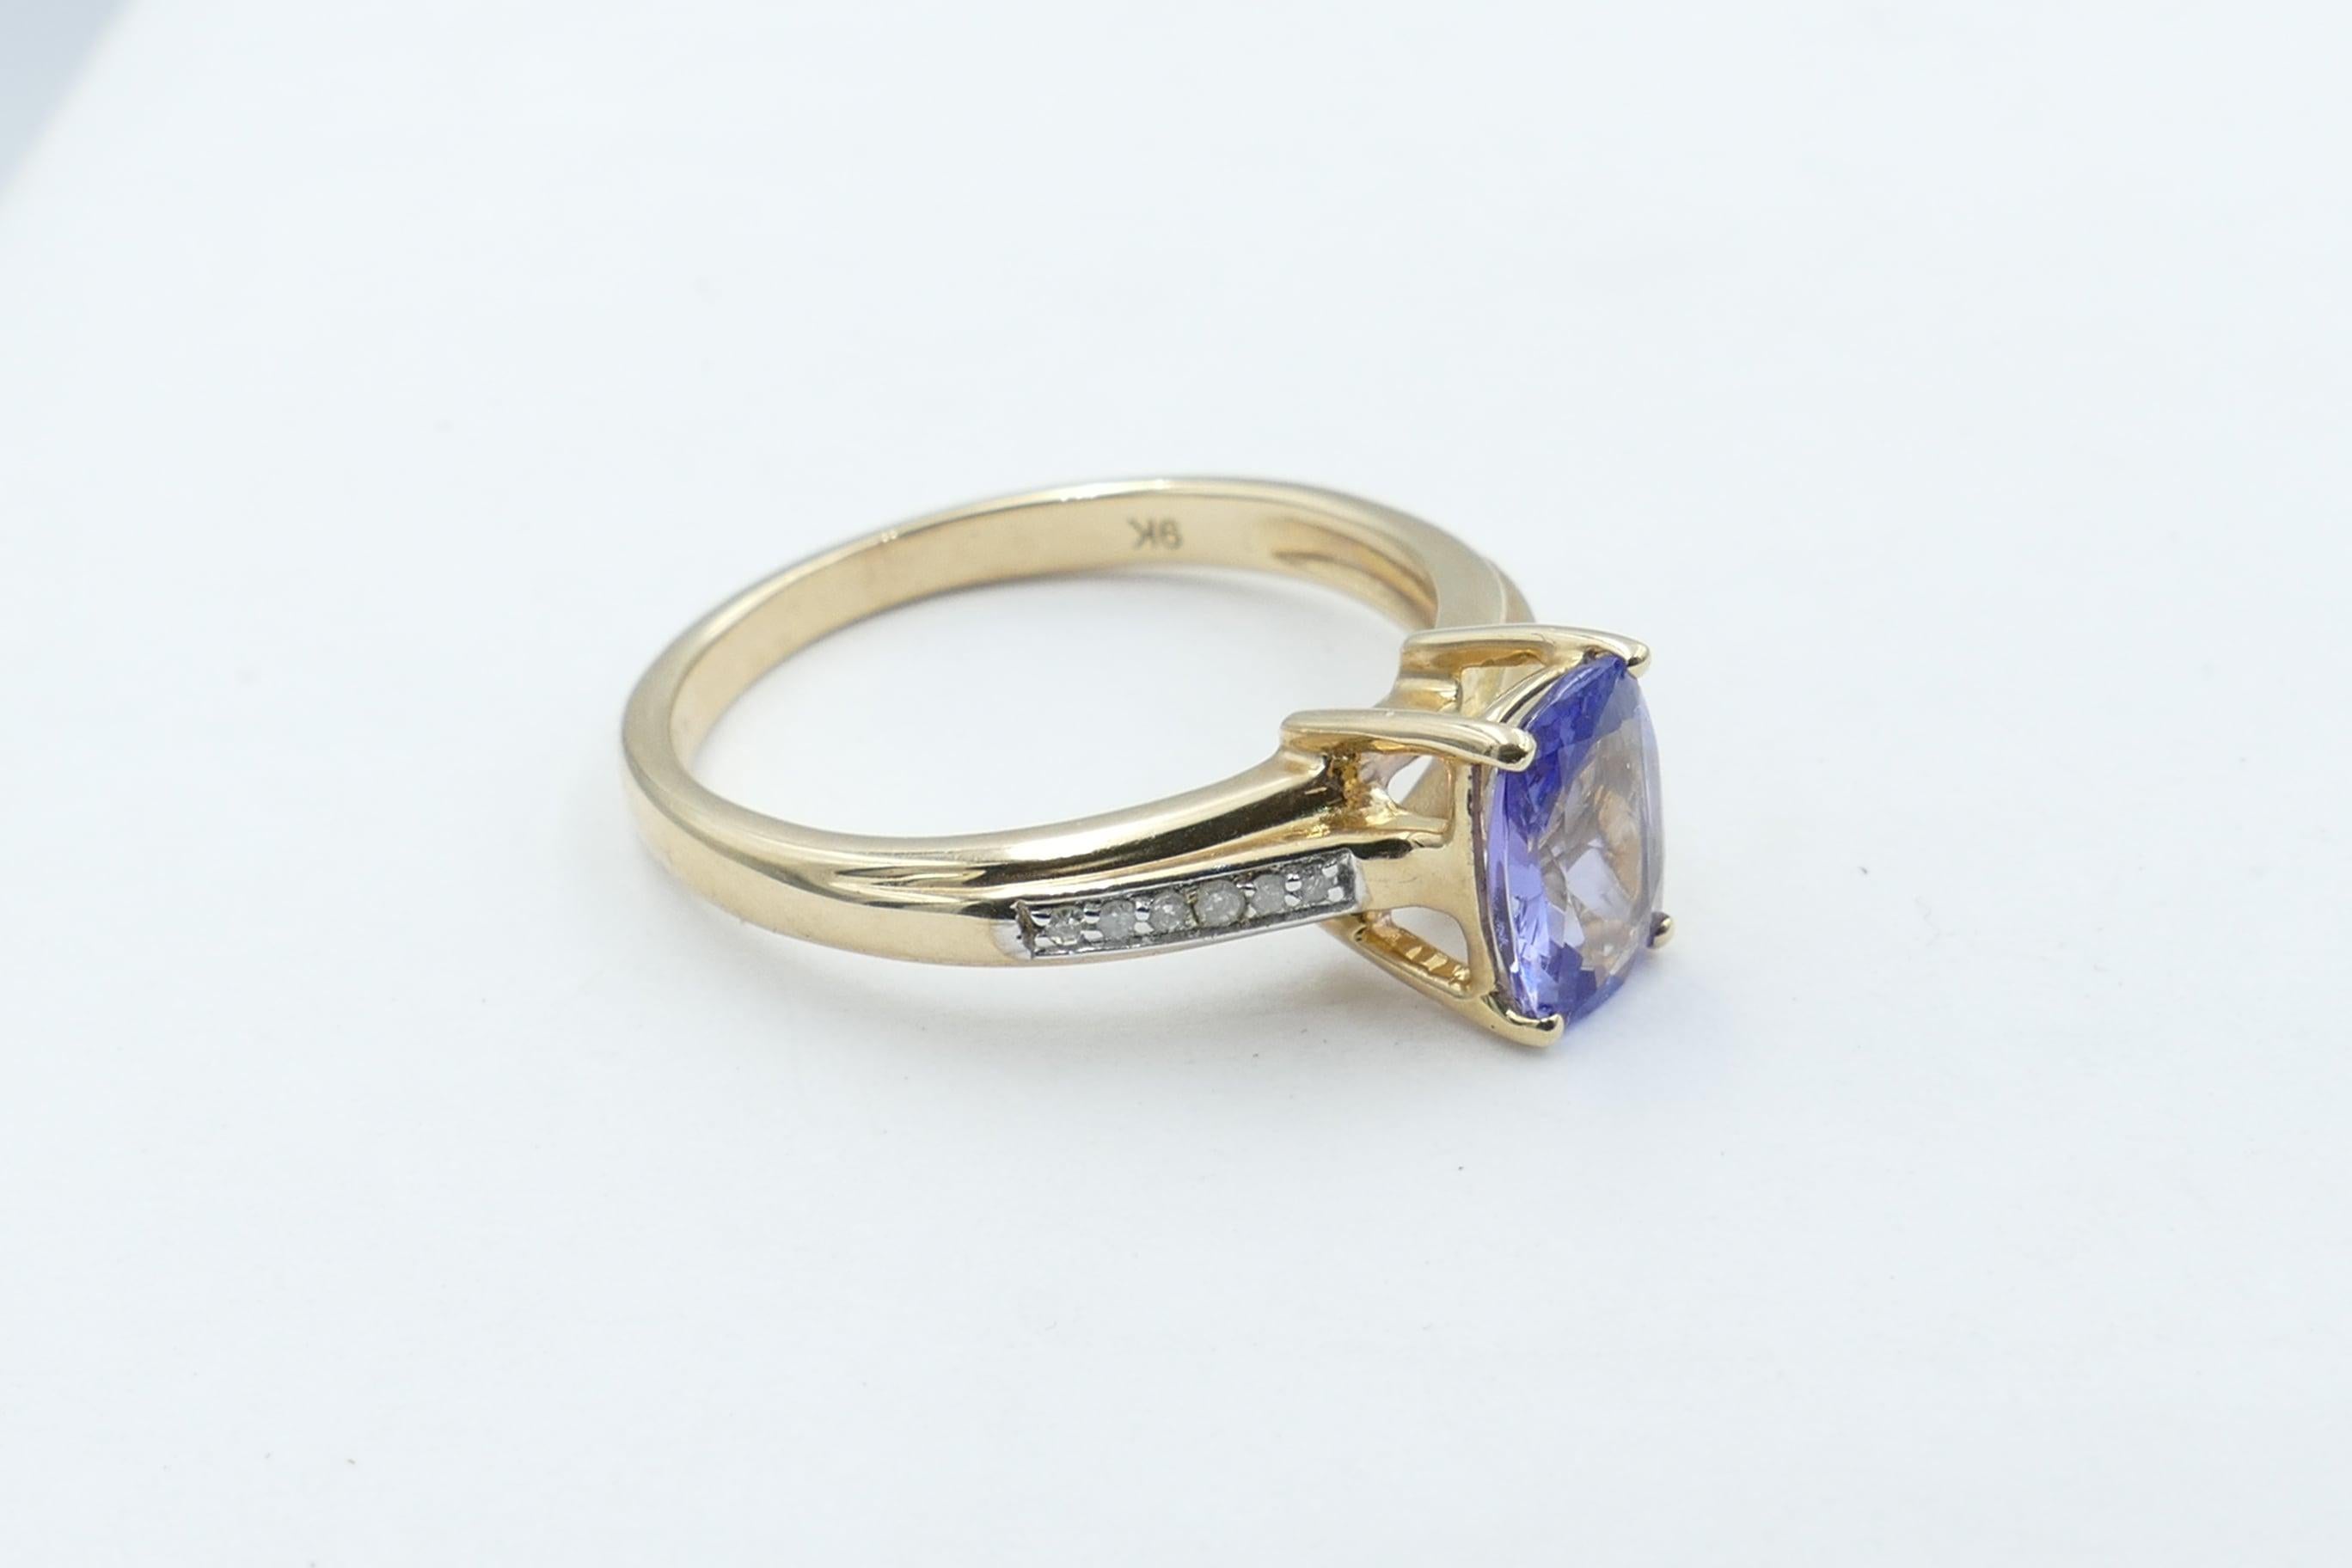 One 1.34 carat Tanzanite with Colour of Purplish-blue, Tone medium, Clarity eye-clean, Rectangular Cushion Cut, 4 claw set, is flanked by 12 Single Round Cut Diamonds J/K Colour Clarity I1-I2 makes up this very versatile Ring that presents as an